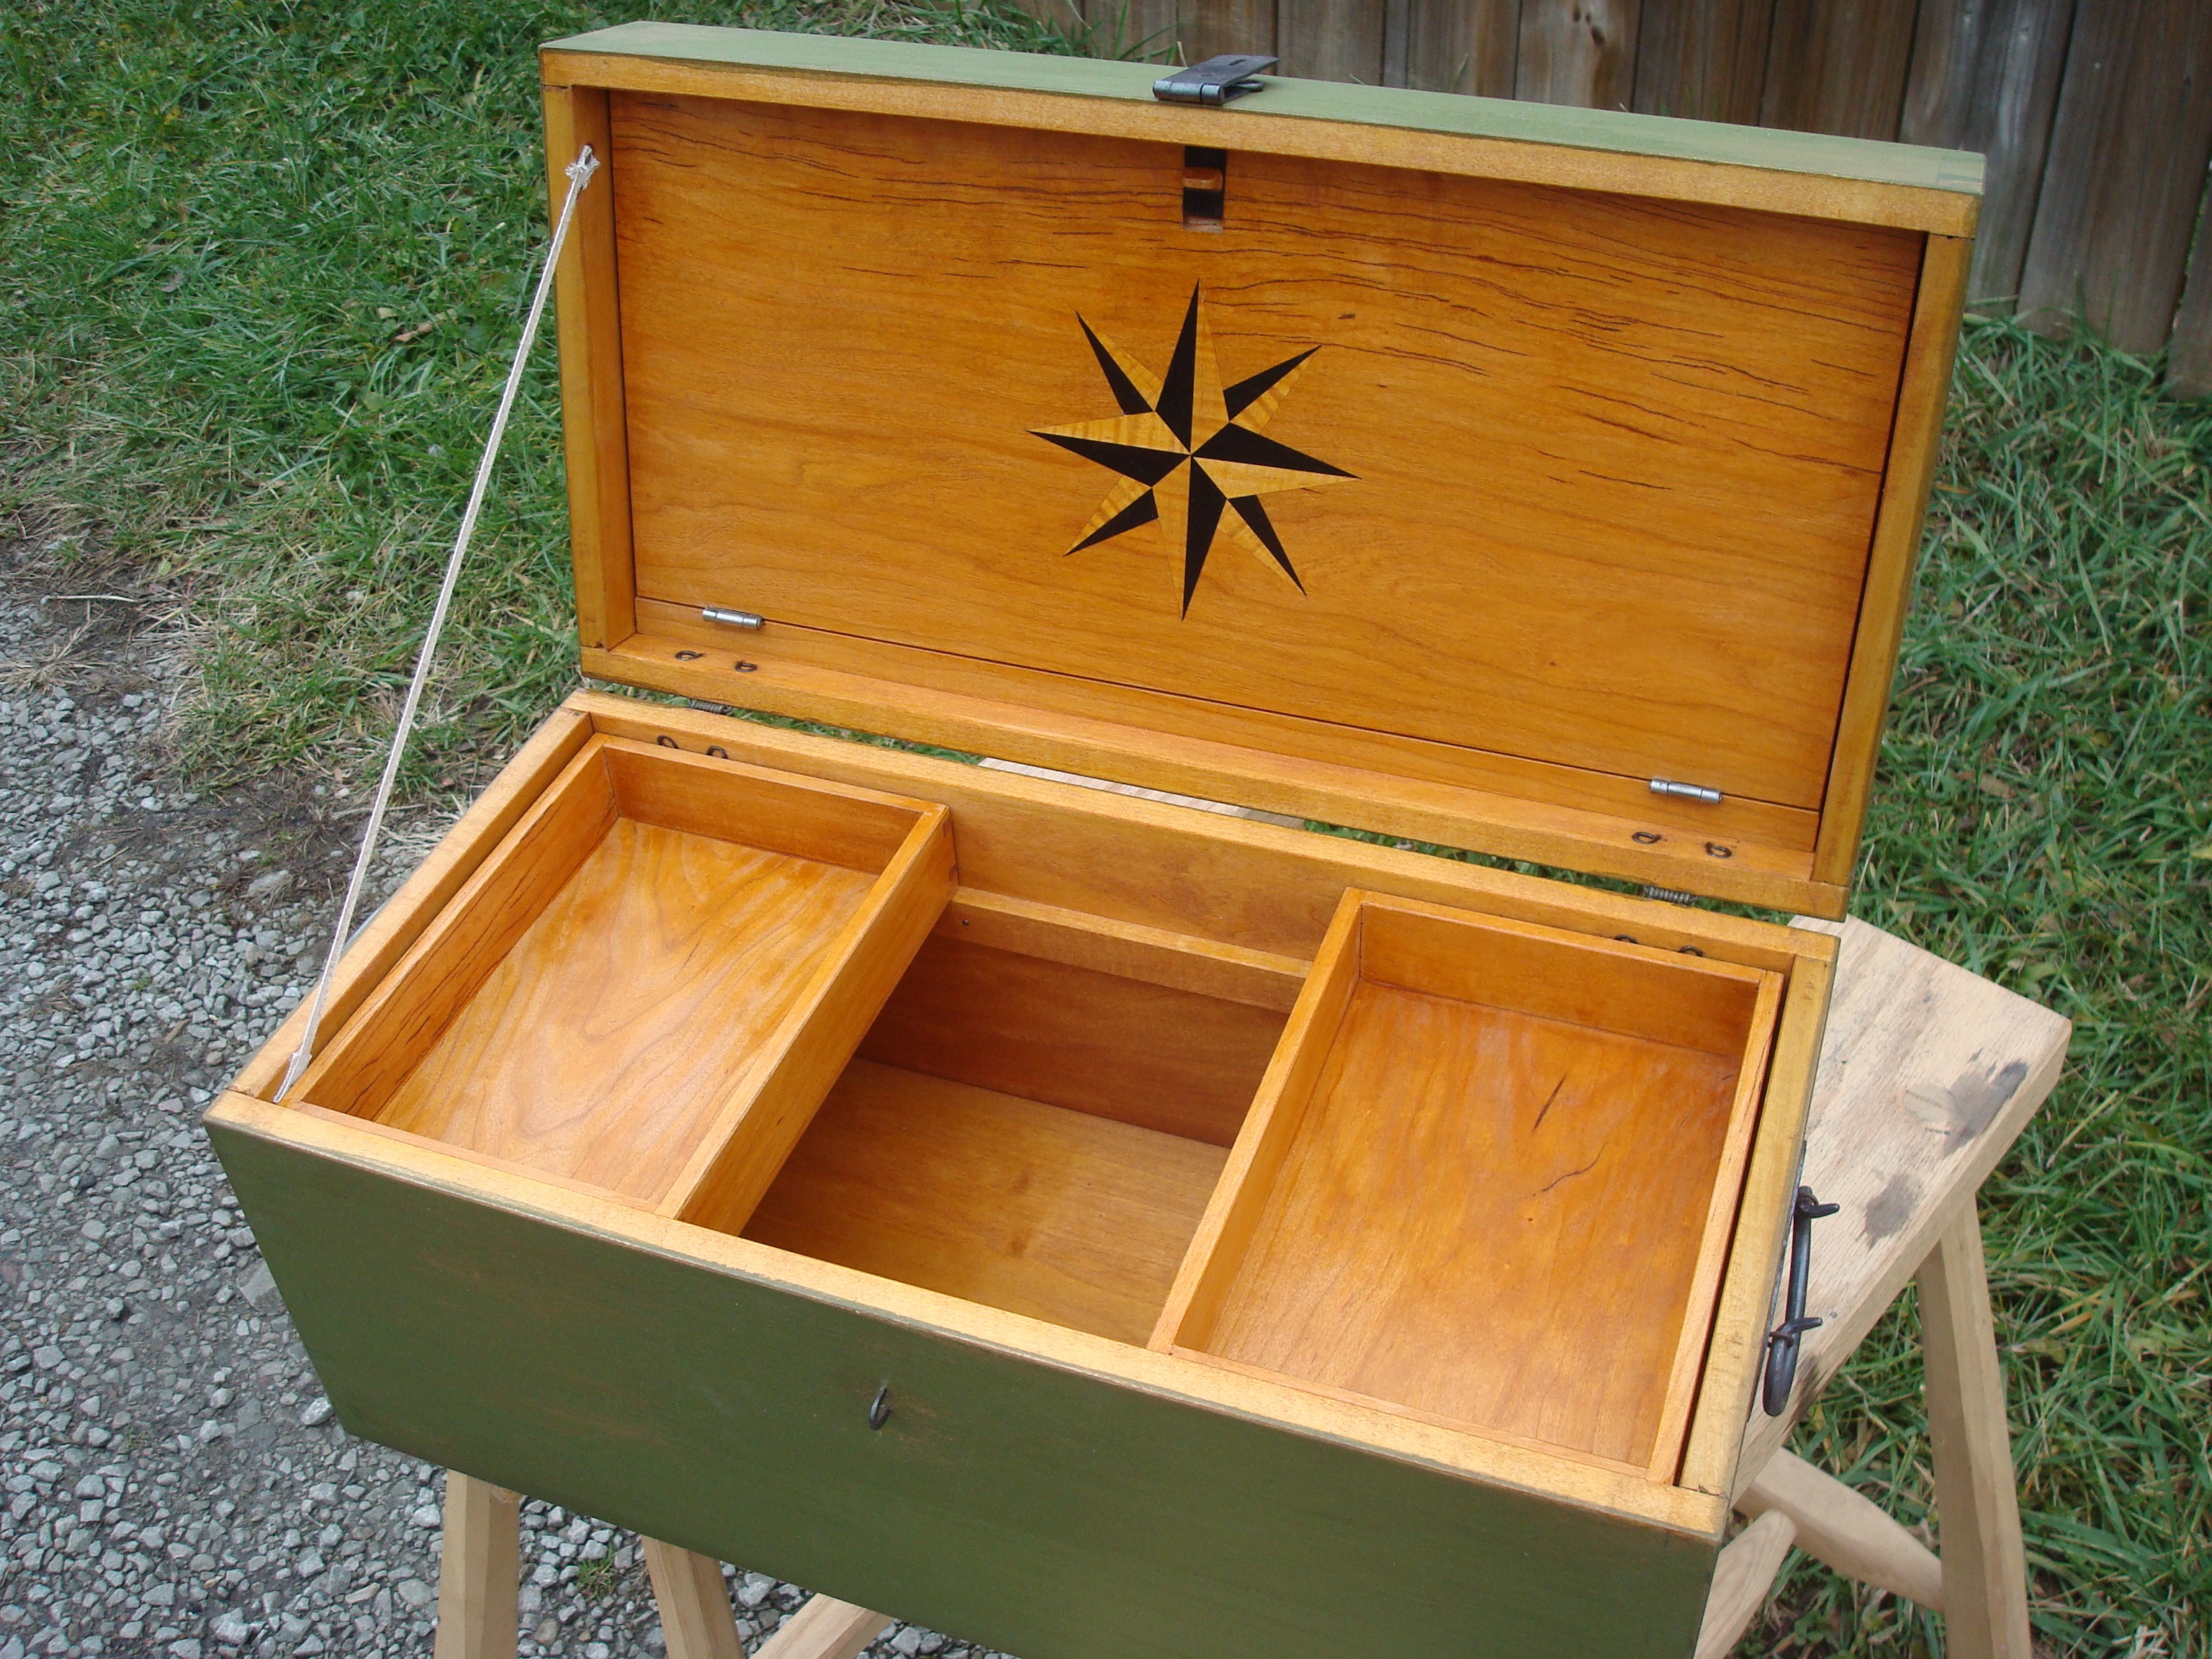 Painted box with tills and drop down compartment in the lid